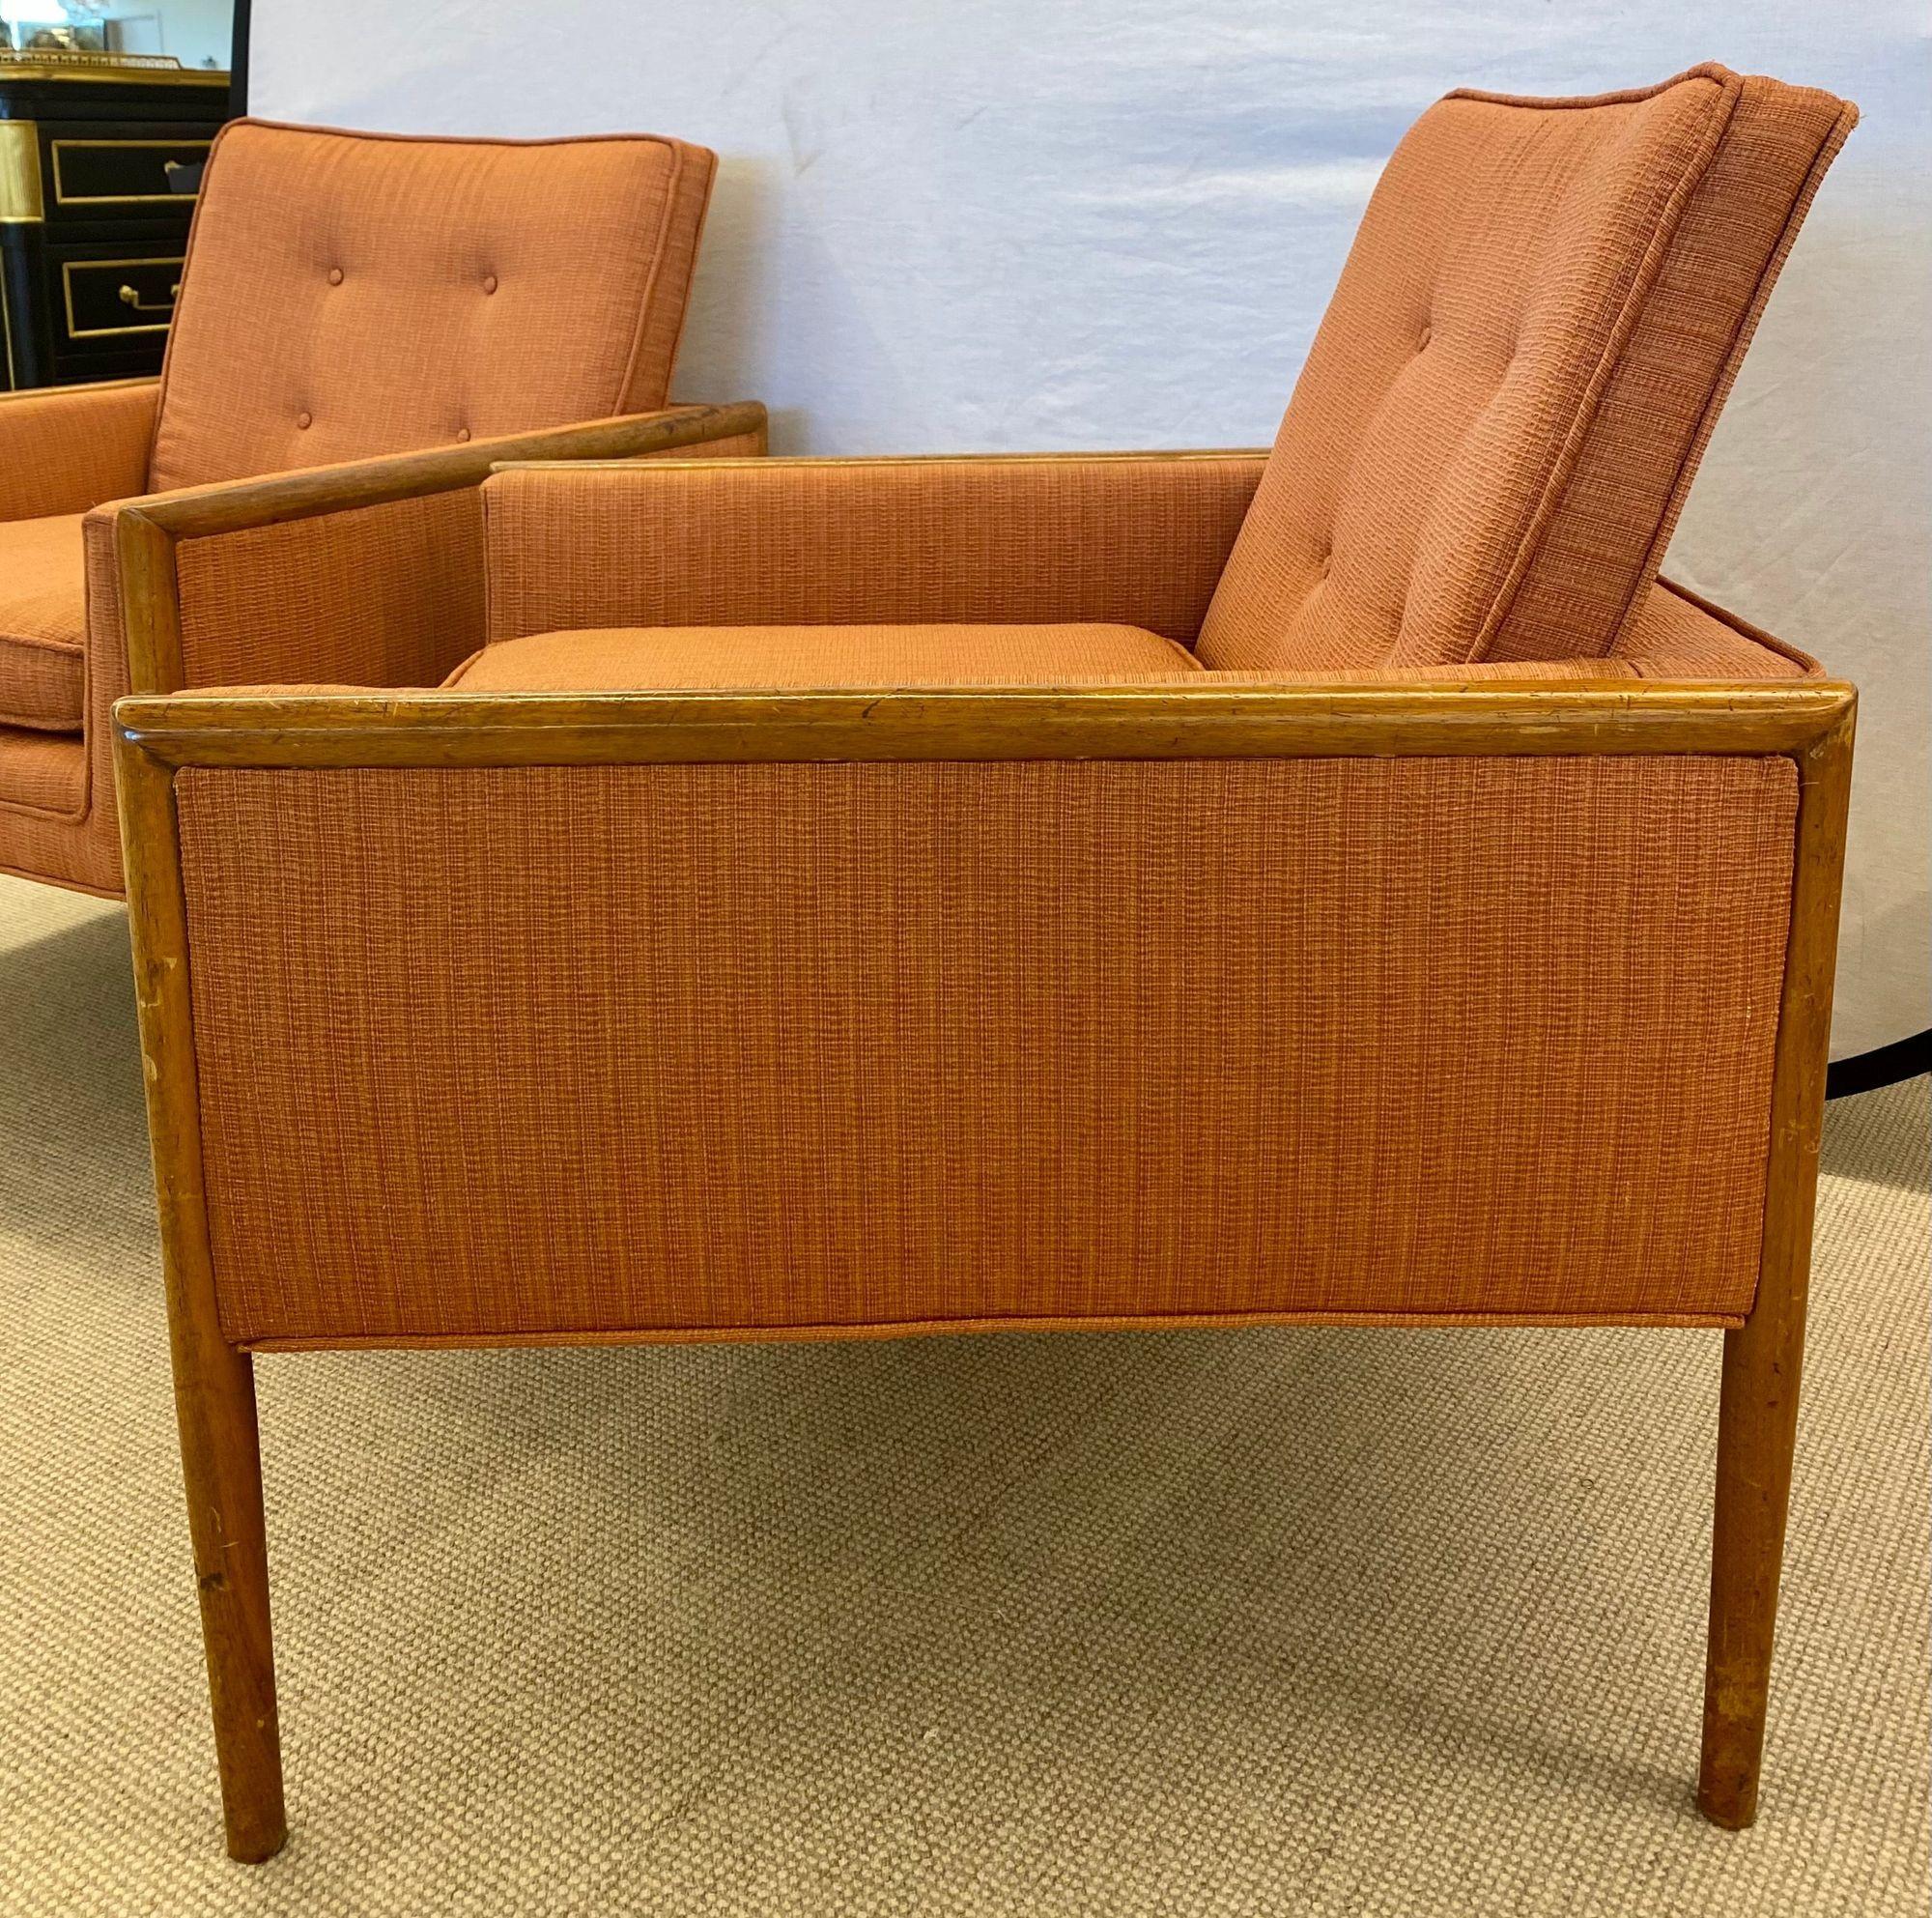 Pair of Mid-Century Modern Lounge Chairs, American, Walnut, 1960s For Sale 13